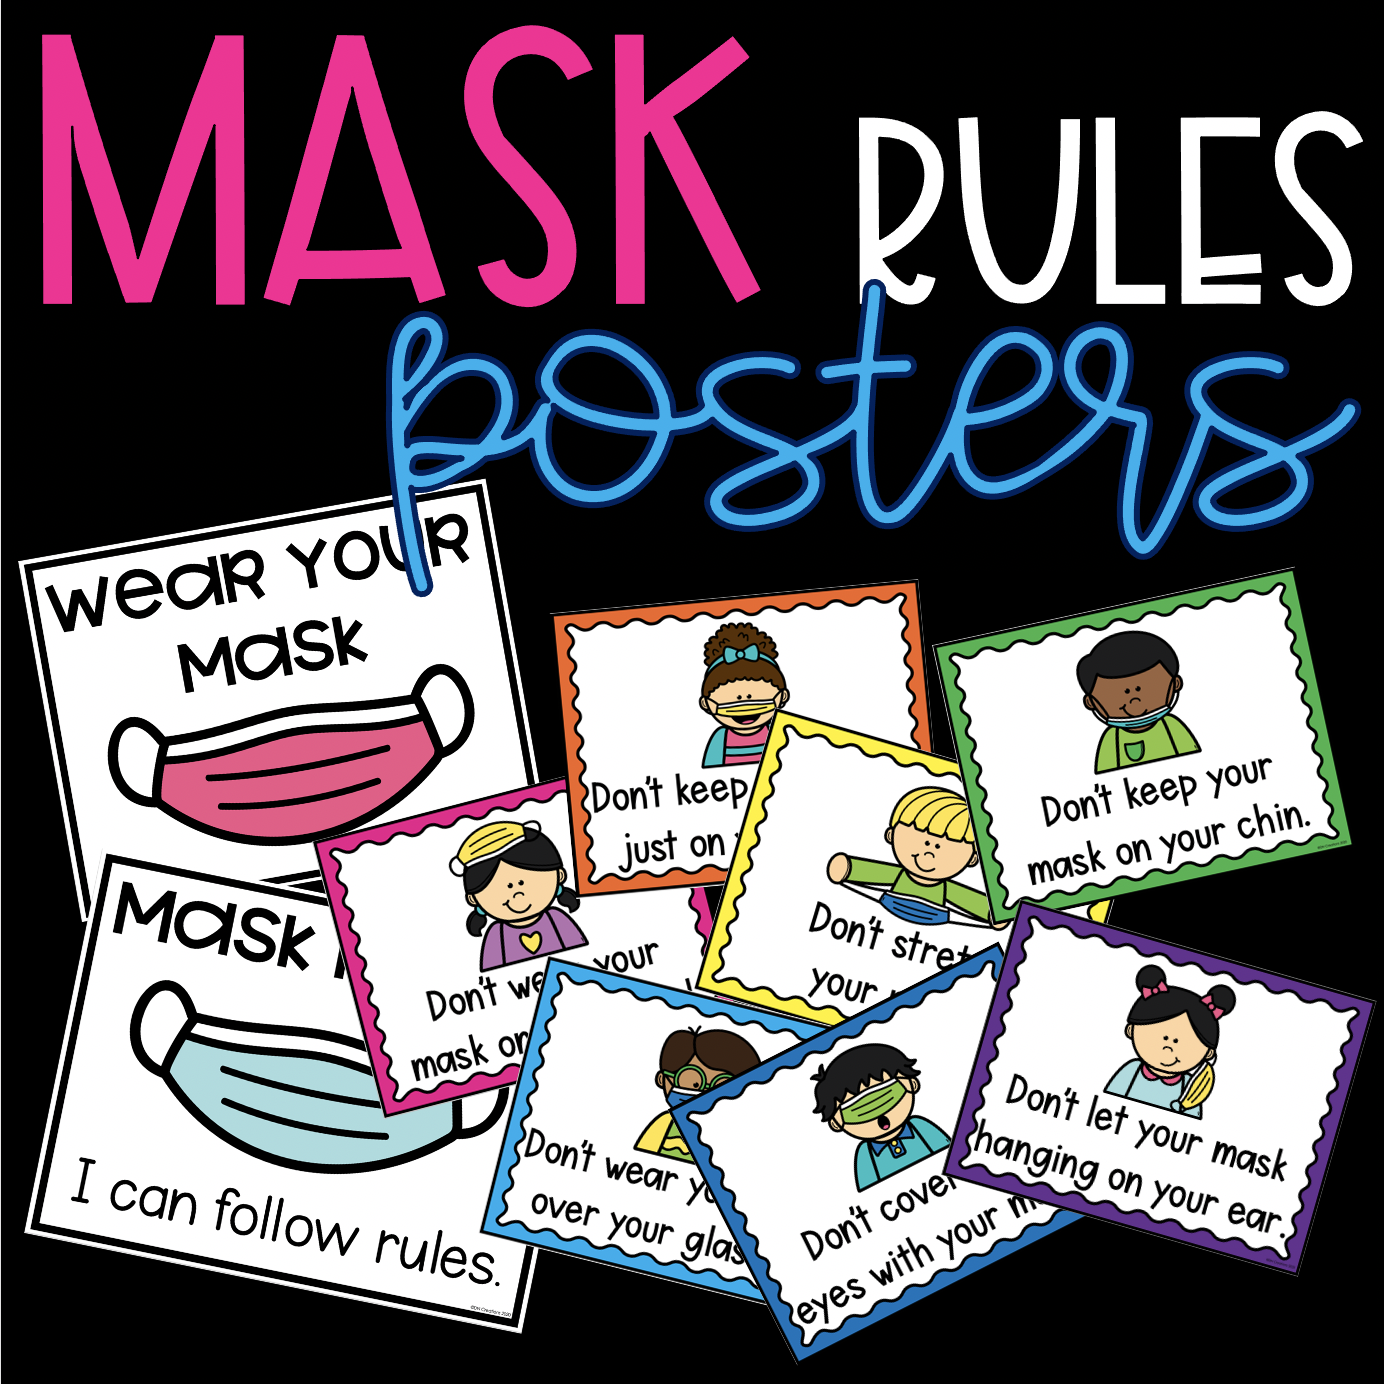 Mask Rules Poster l Covid Safety Posters l Healthy and Safety Posters's featured image